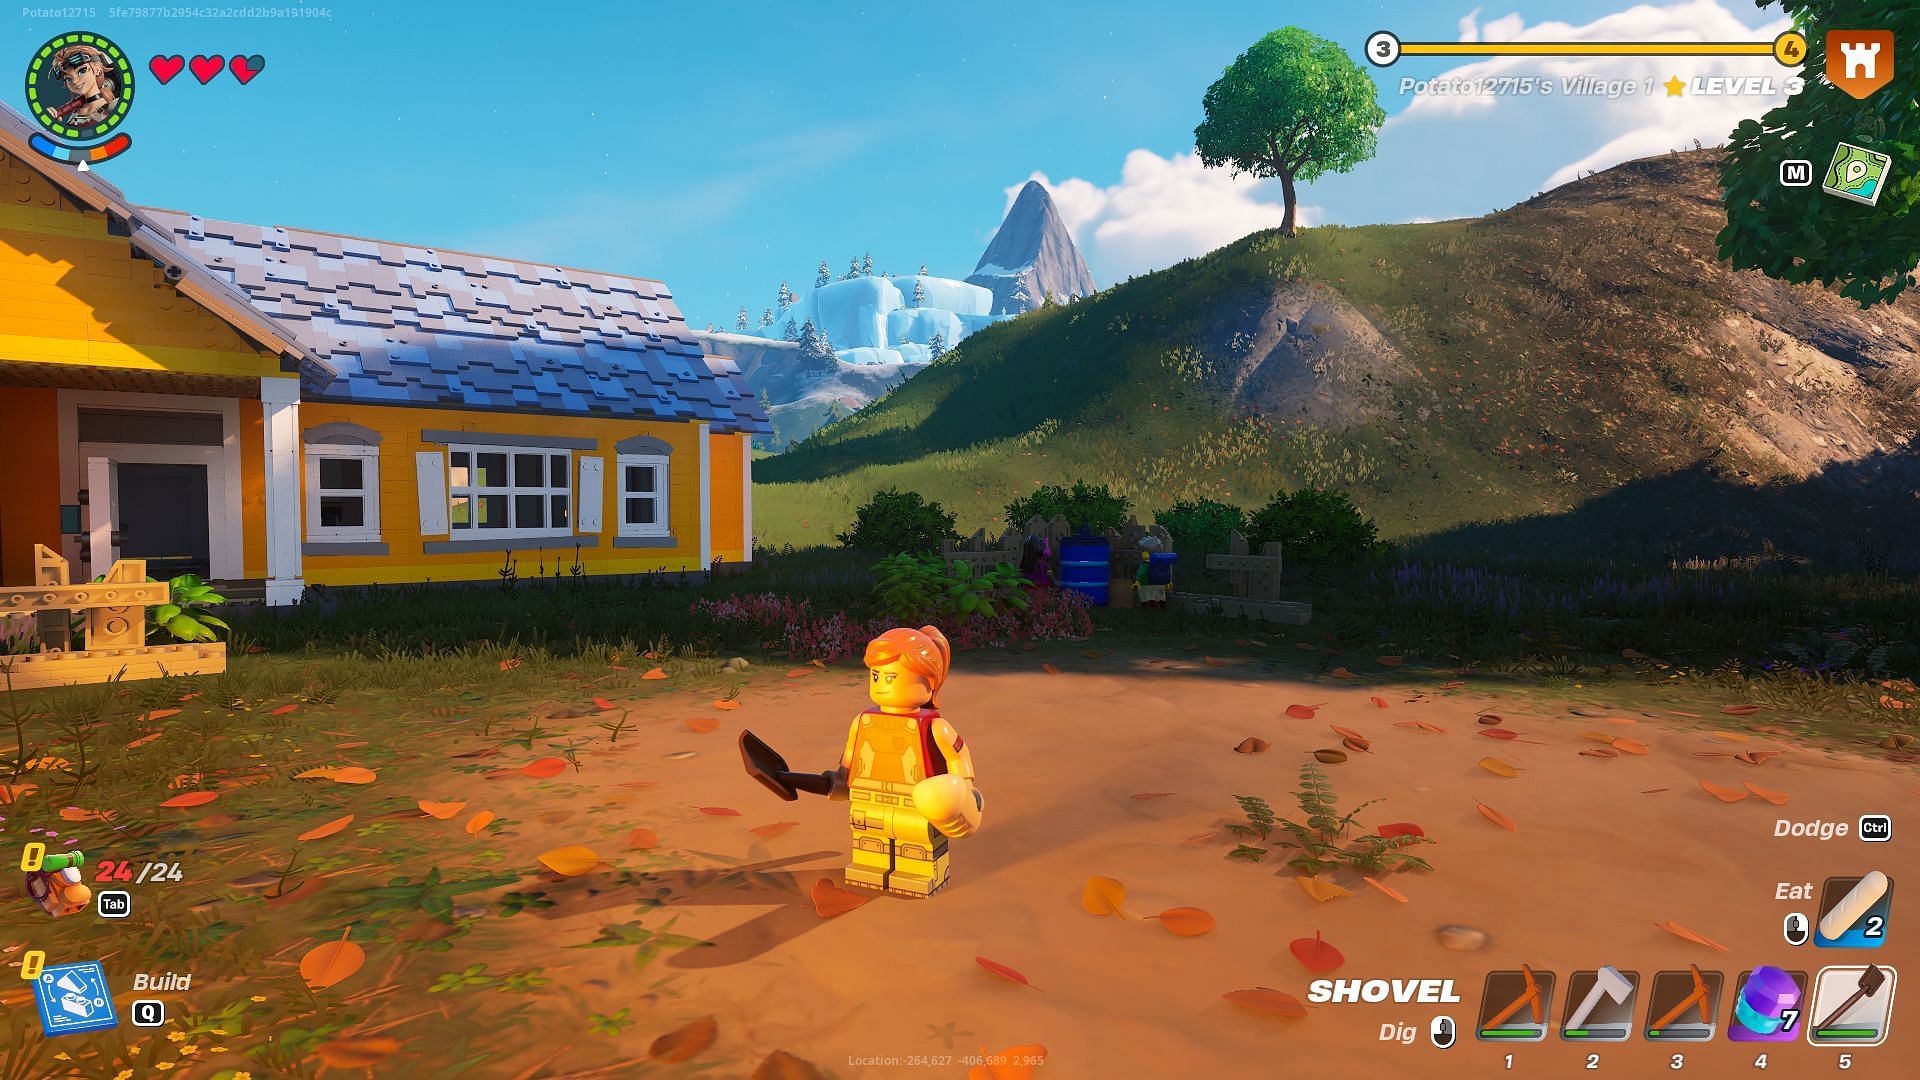 Try digging in different spots to collect Seeds (Image via Epic Games)